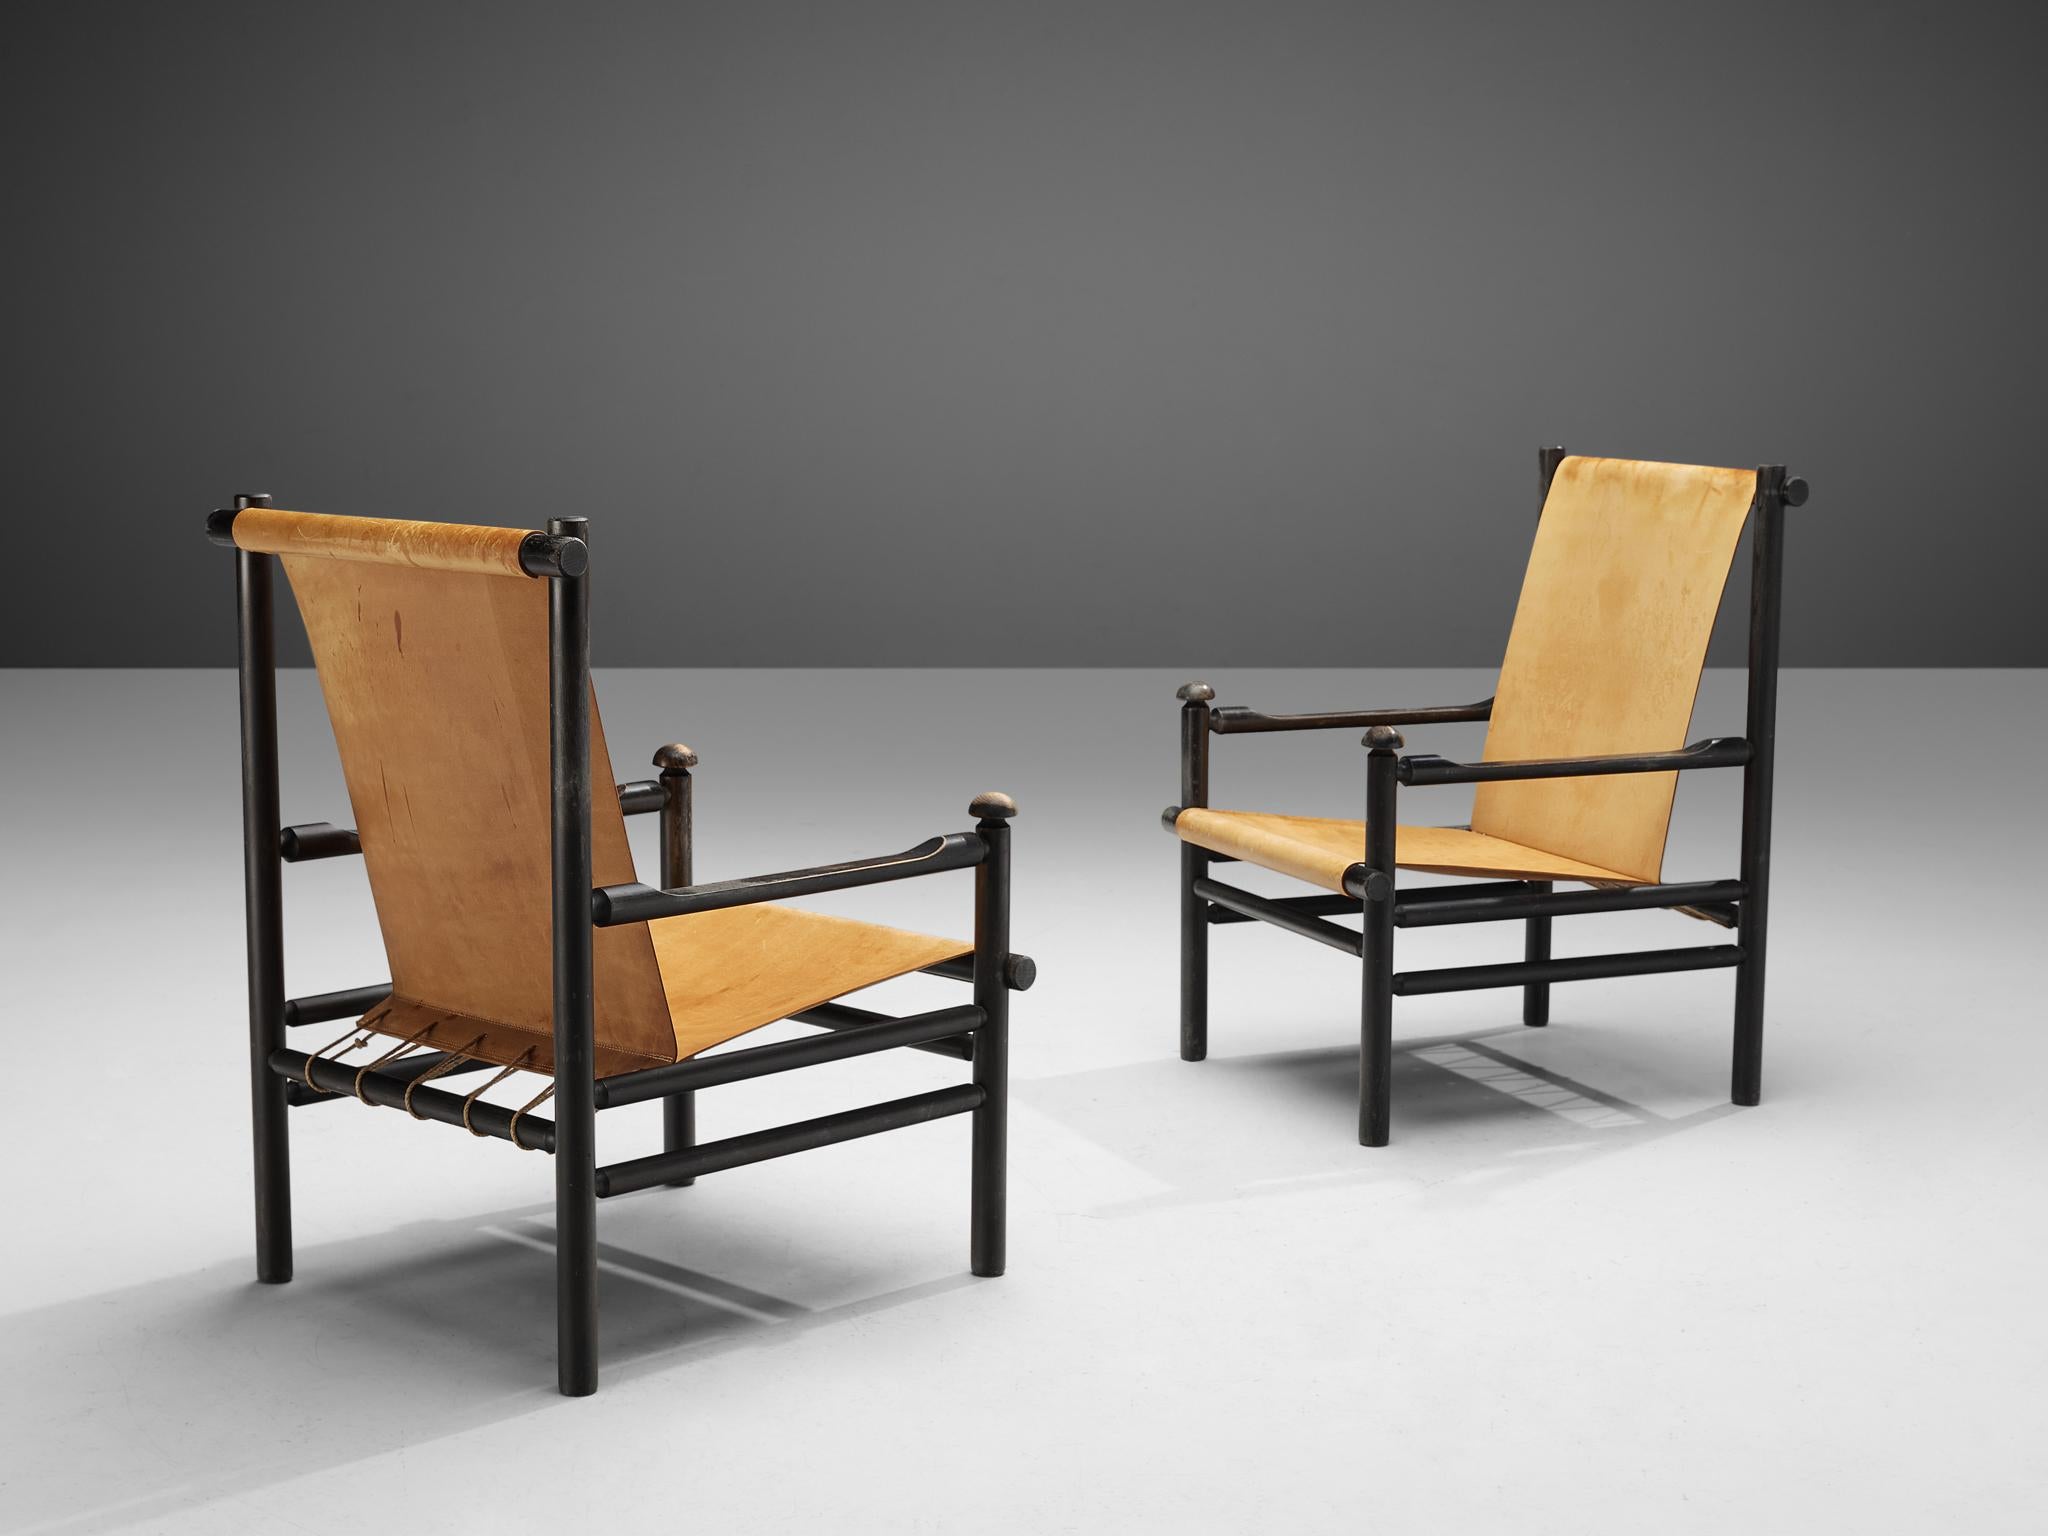 Pair of lounge chairs, cognac leather and black stained wood, Italy, 1950s. 

These chairs embody a strong and angular frame, while also offering a spacious feel due to the open design and light color leather seating. The visible joints are a design